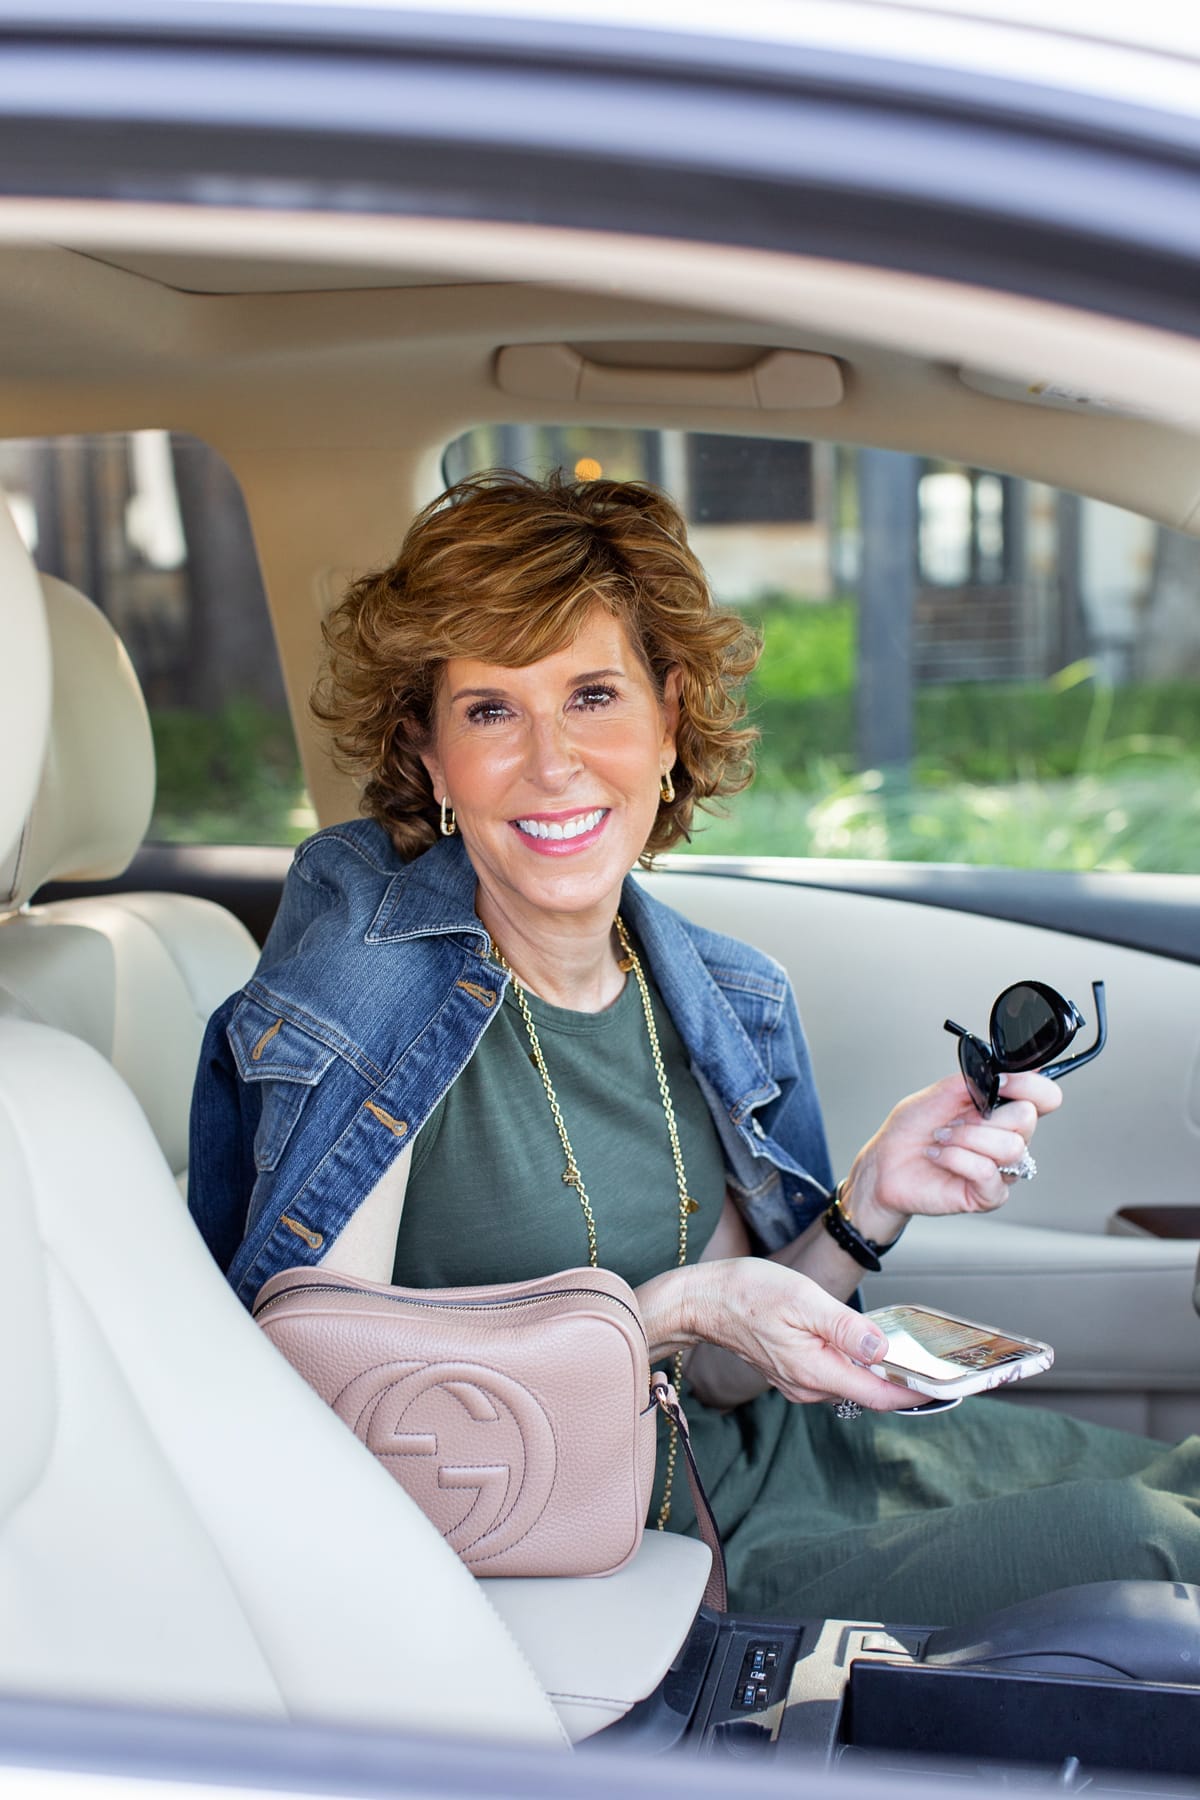 woman in green dress and denim jacket sitting in her car holding her phone looking at camera